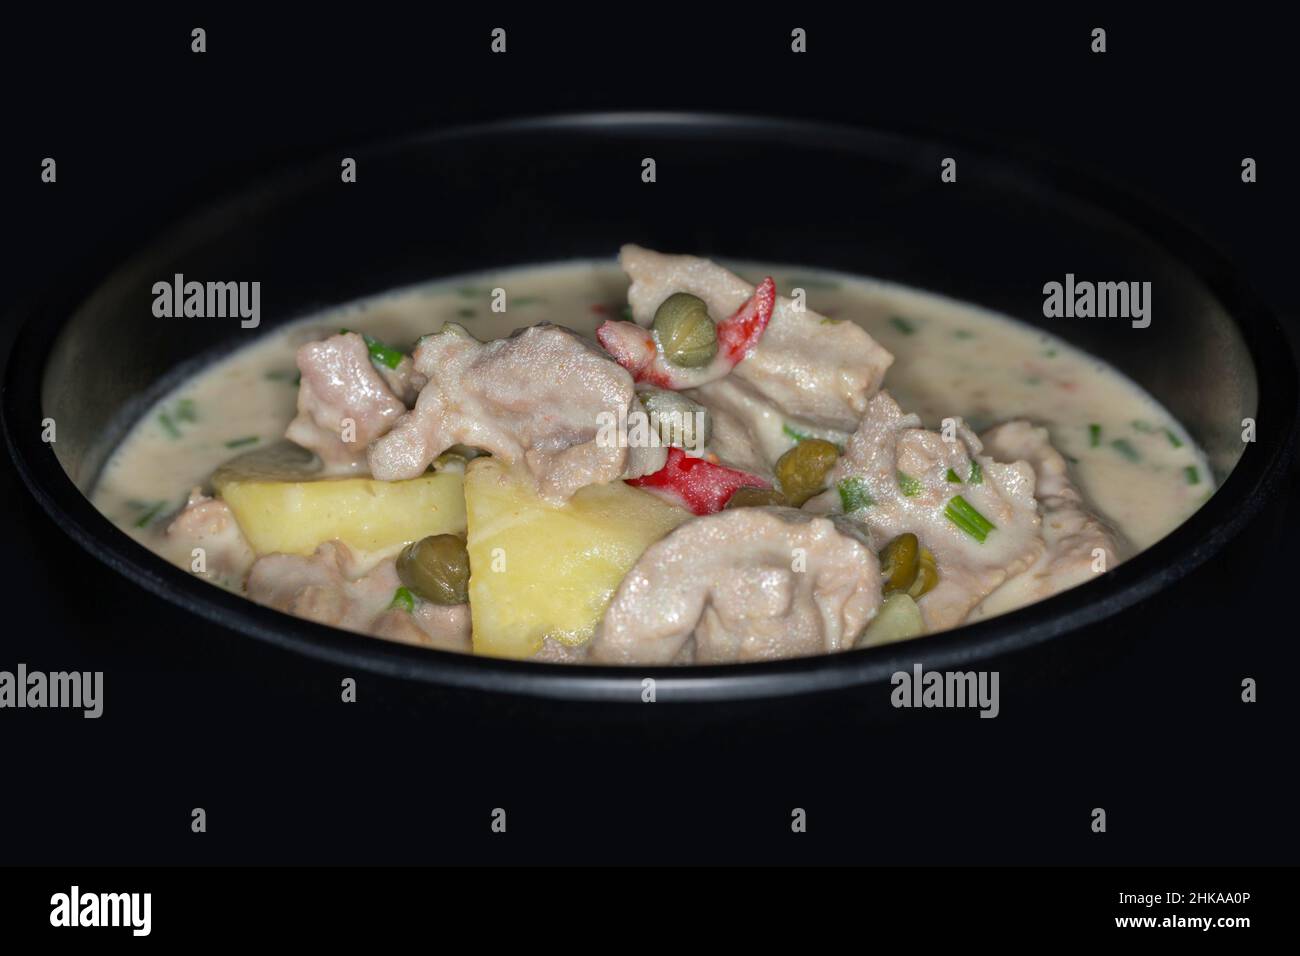 Veal stew Stock Photo